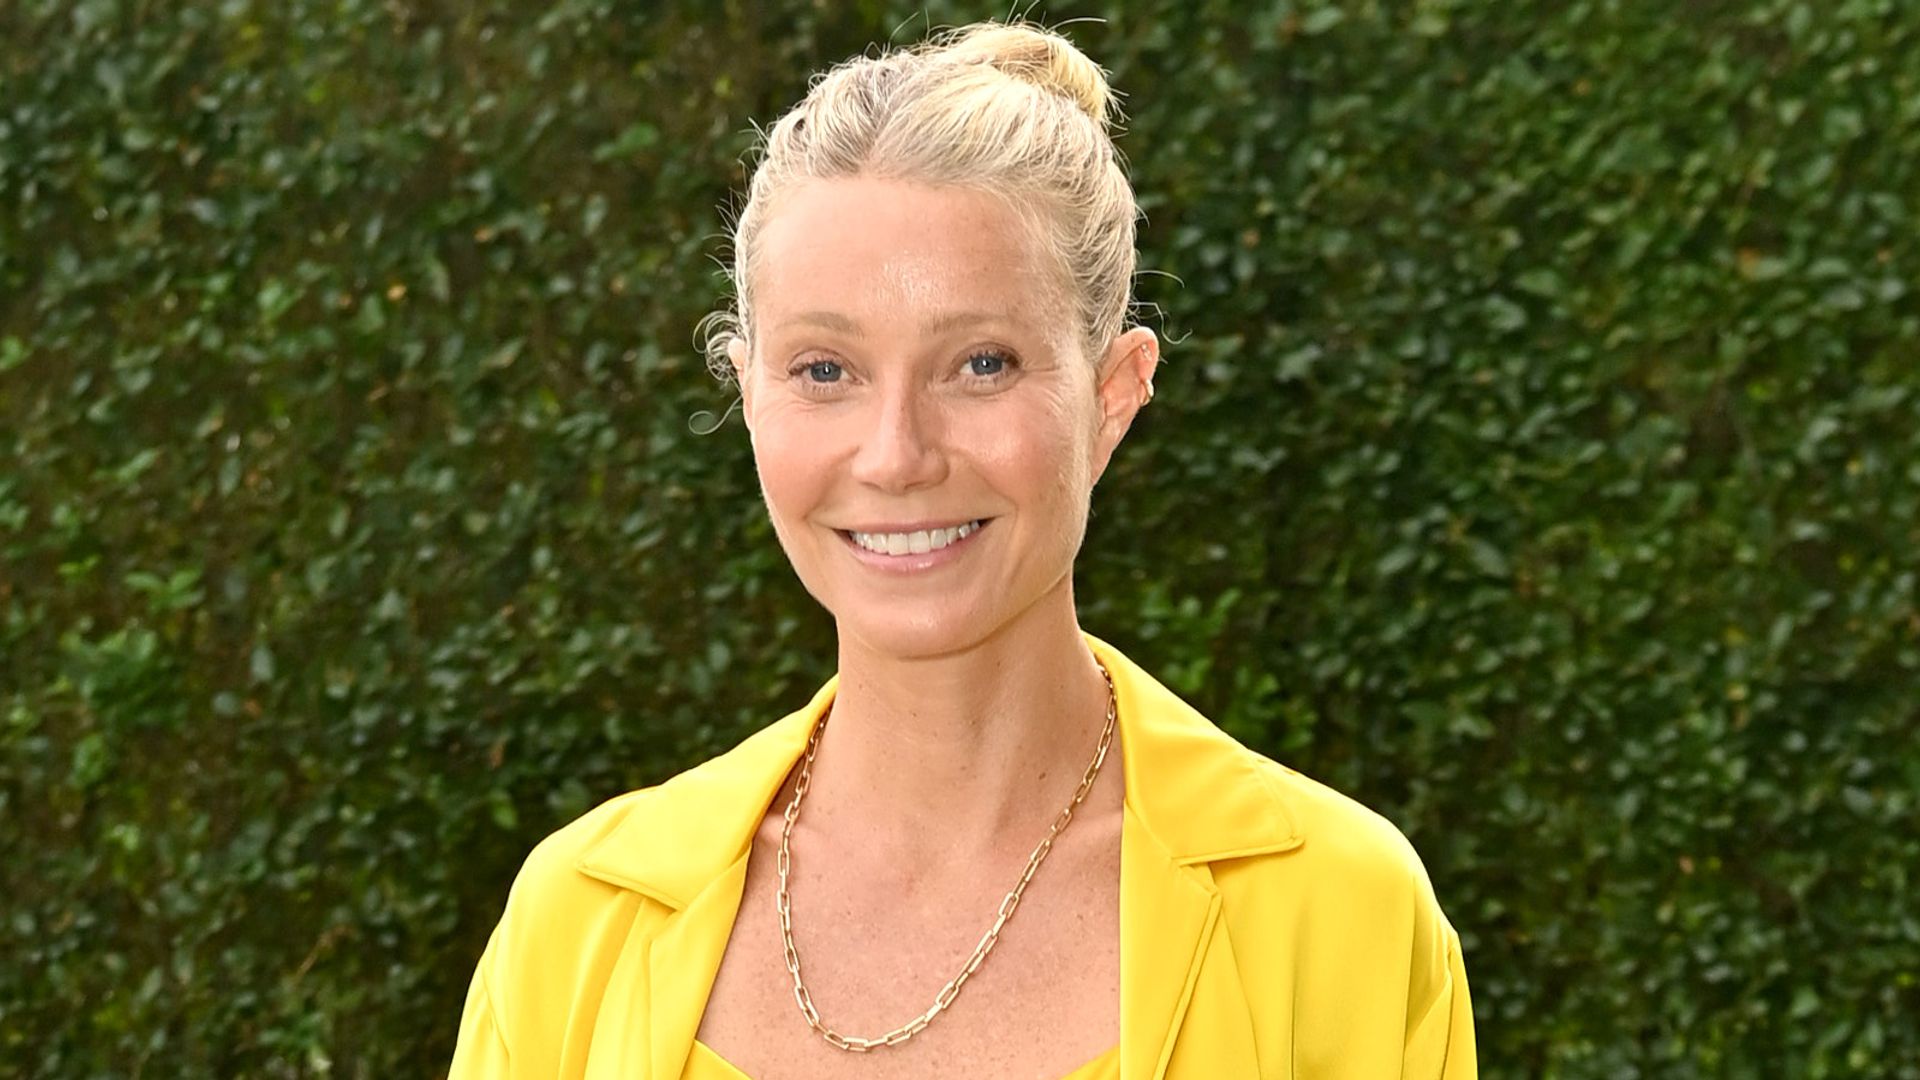 EAST HAMPTON, NEW YORK - JULY 18: Goop Founder, Gwyneth Paltrow attends A Dreamy Evening with Goopglow on July 18, 2022 in East Hampton City. (Photo by Bryan Bedder/Getty Images for Goop)